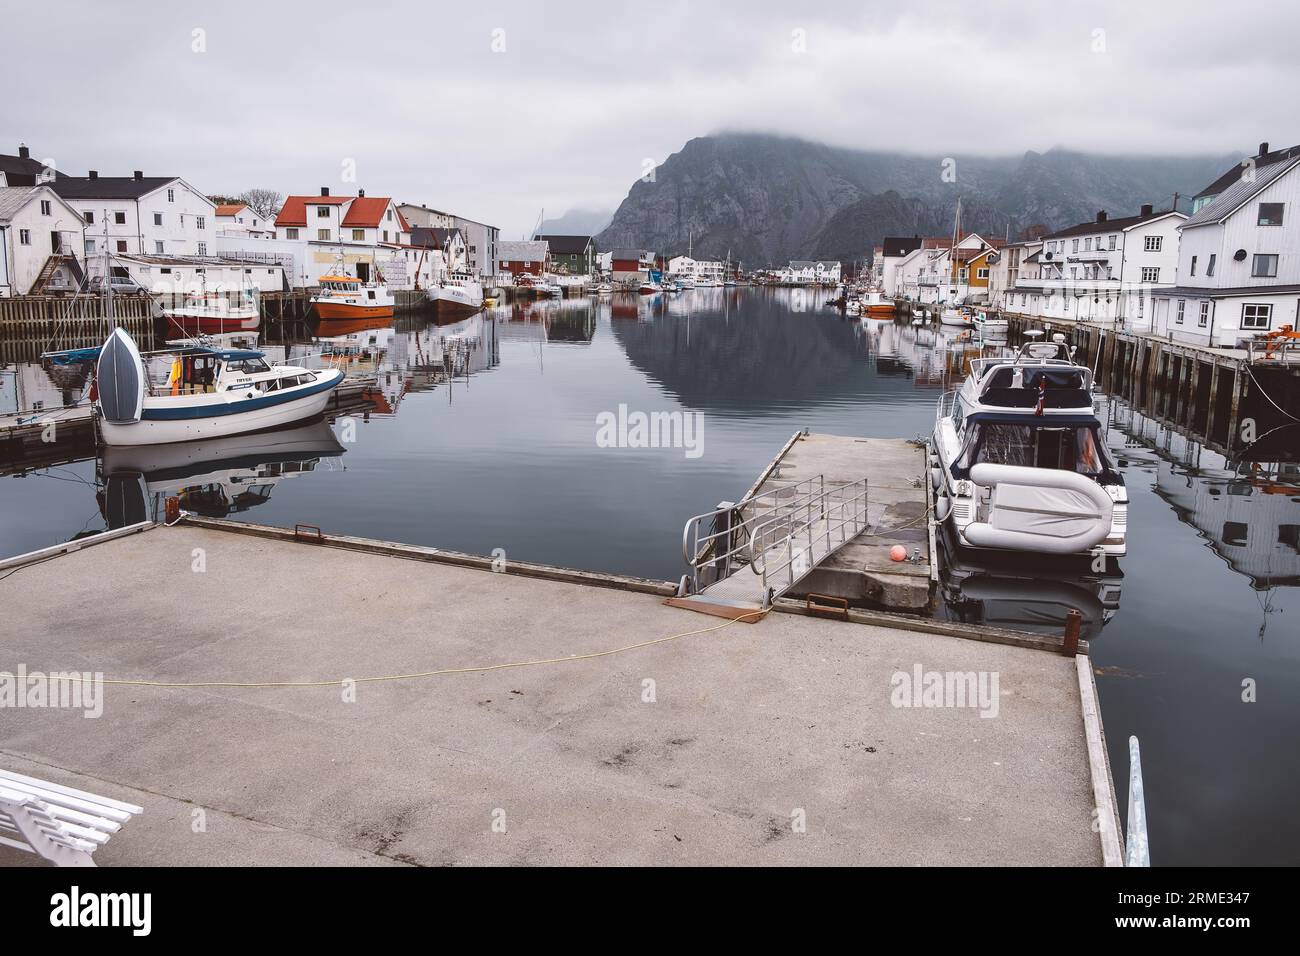 View of a pier and boats in a Norwegian village Stock Photo